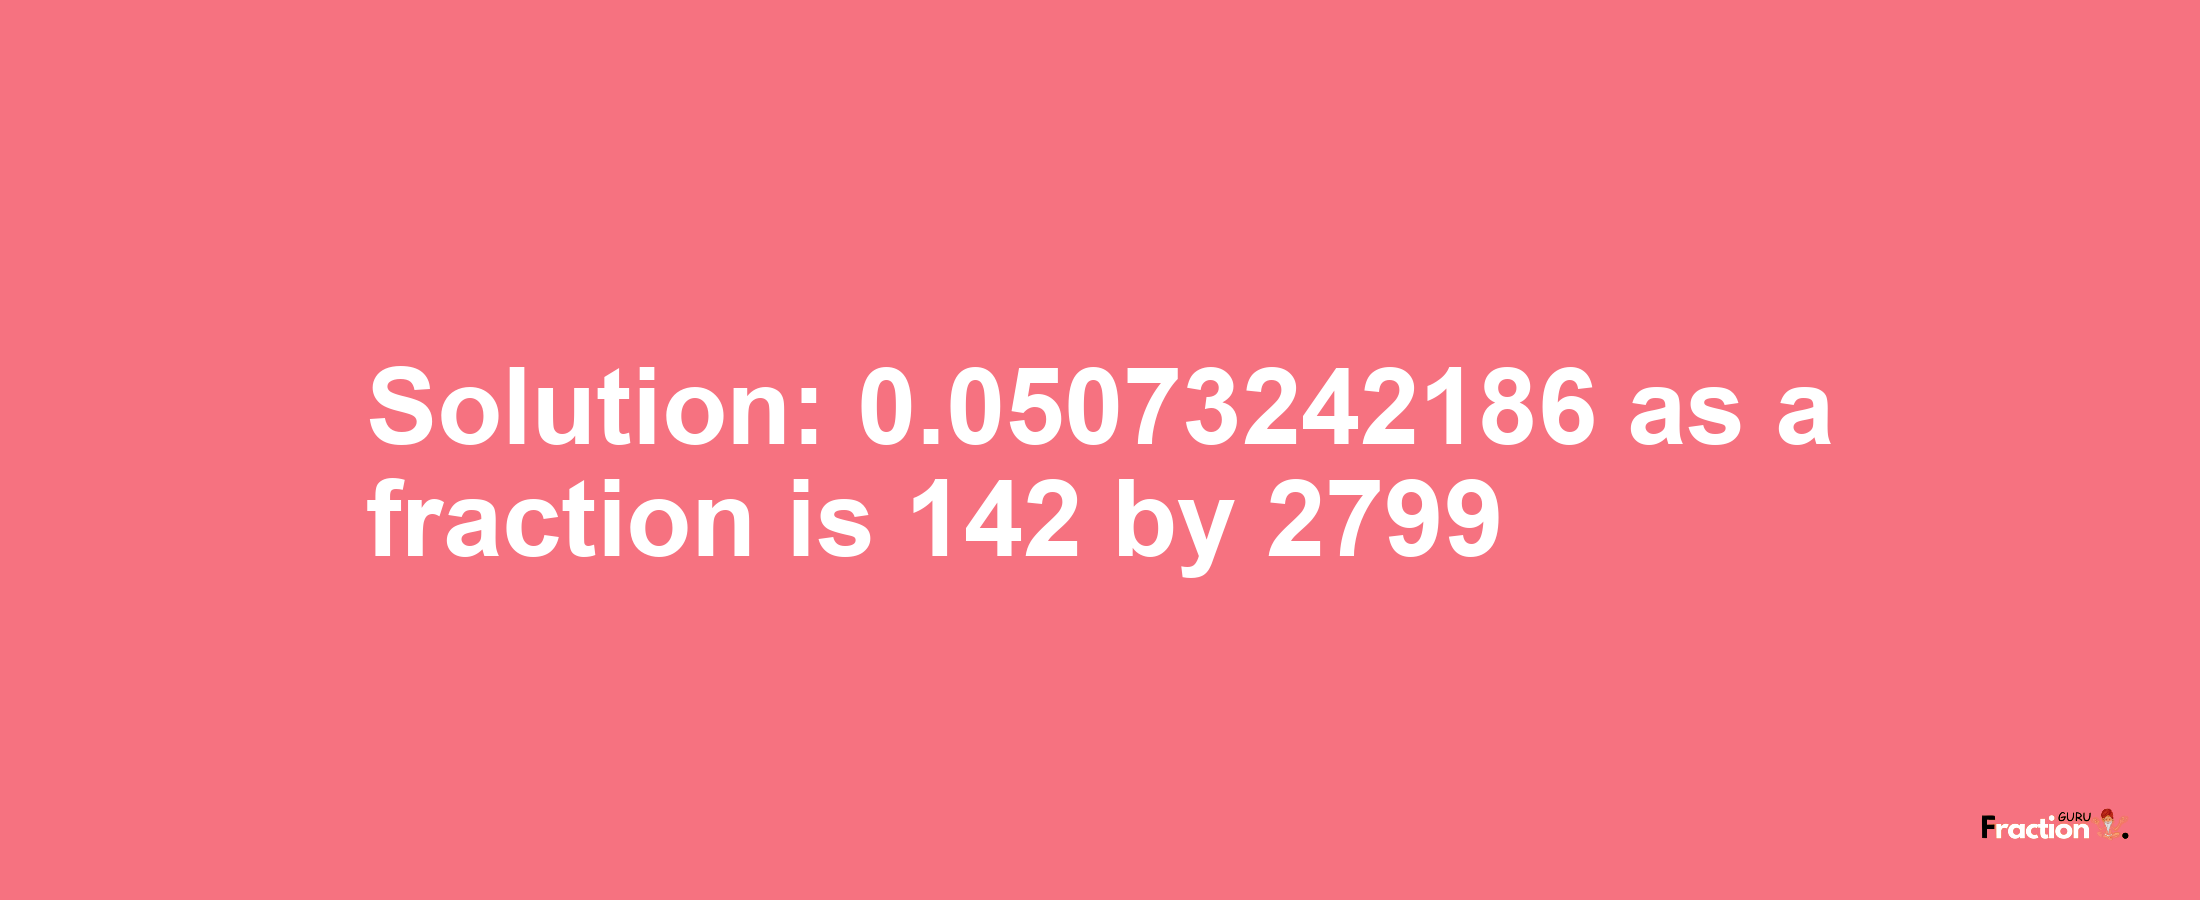 Solution:0.05073242186 as a fraction is 142/2799